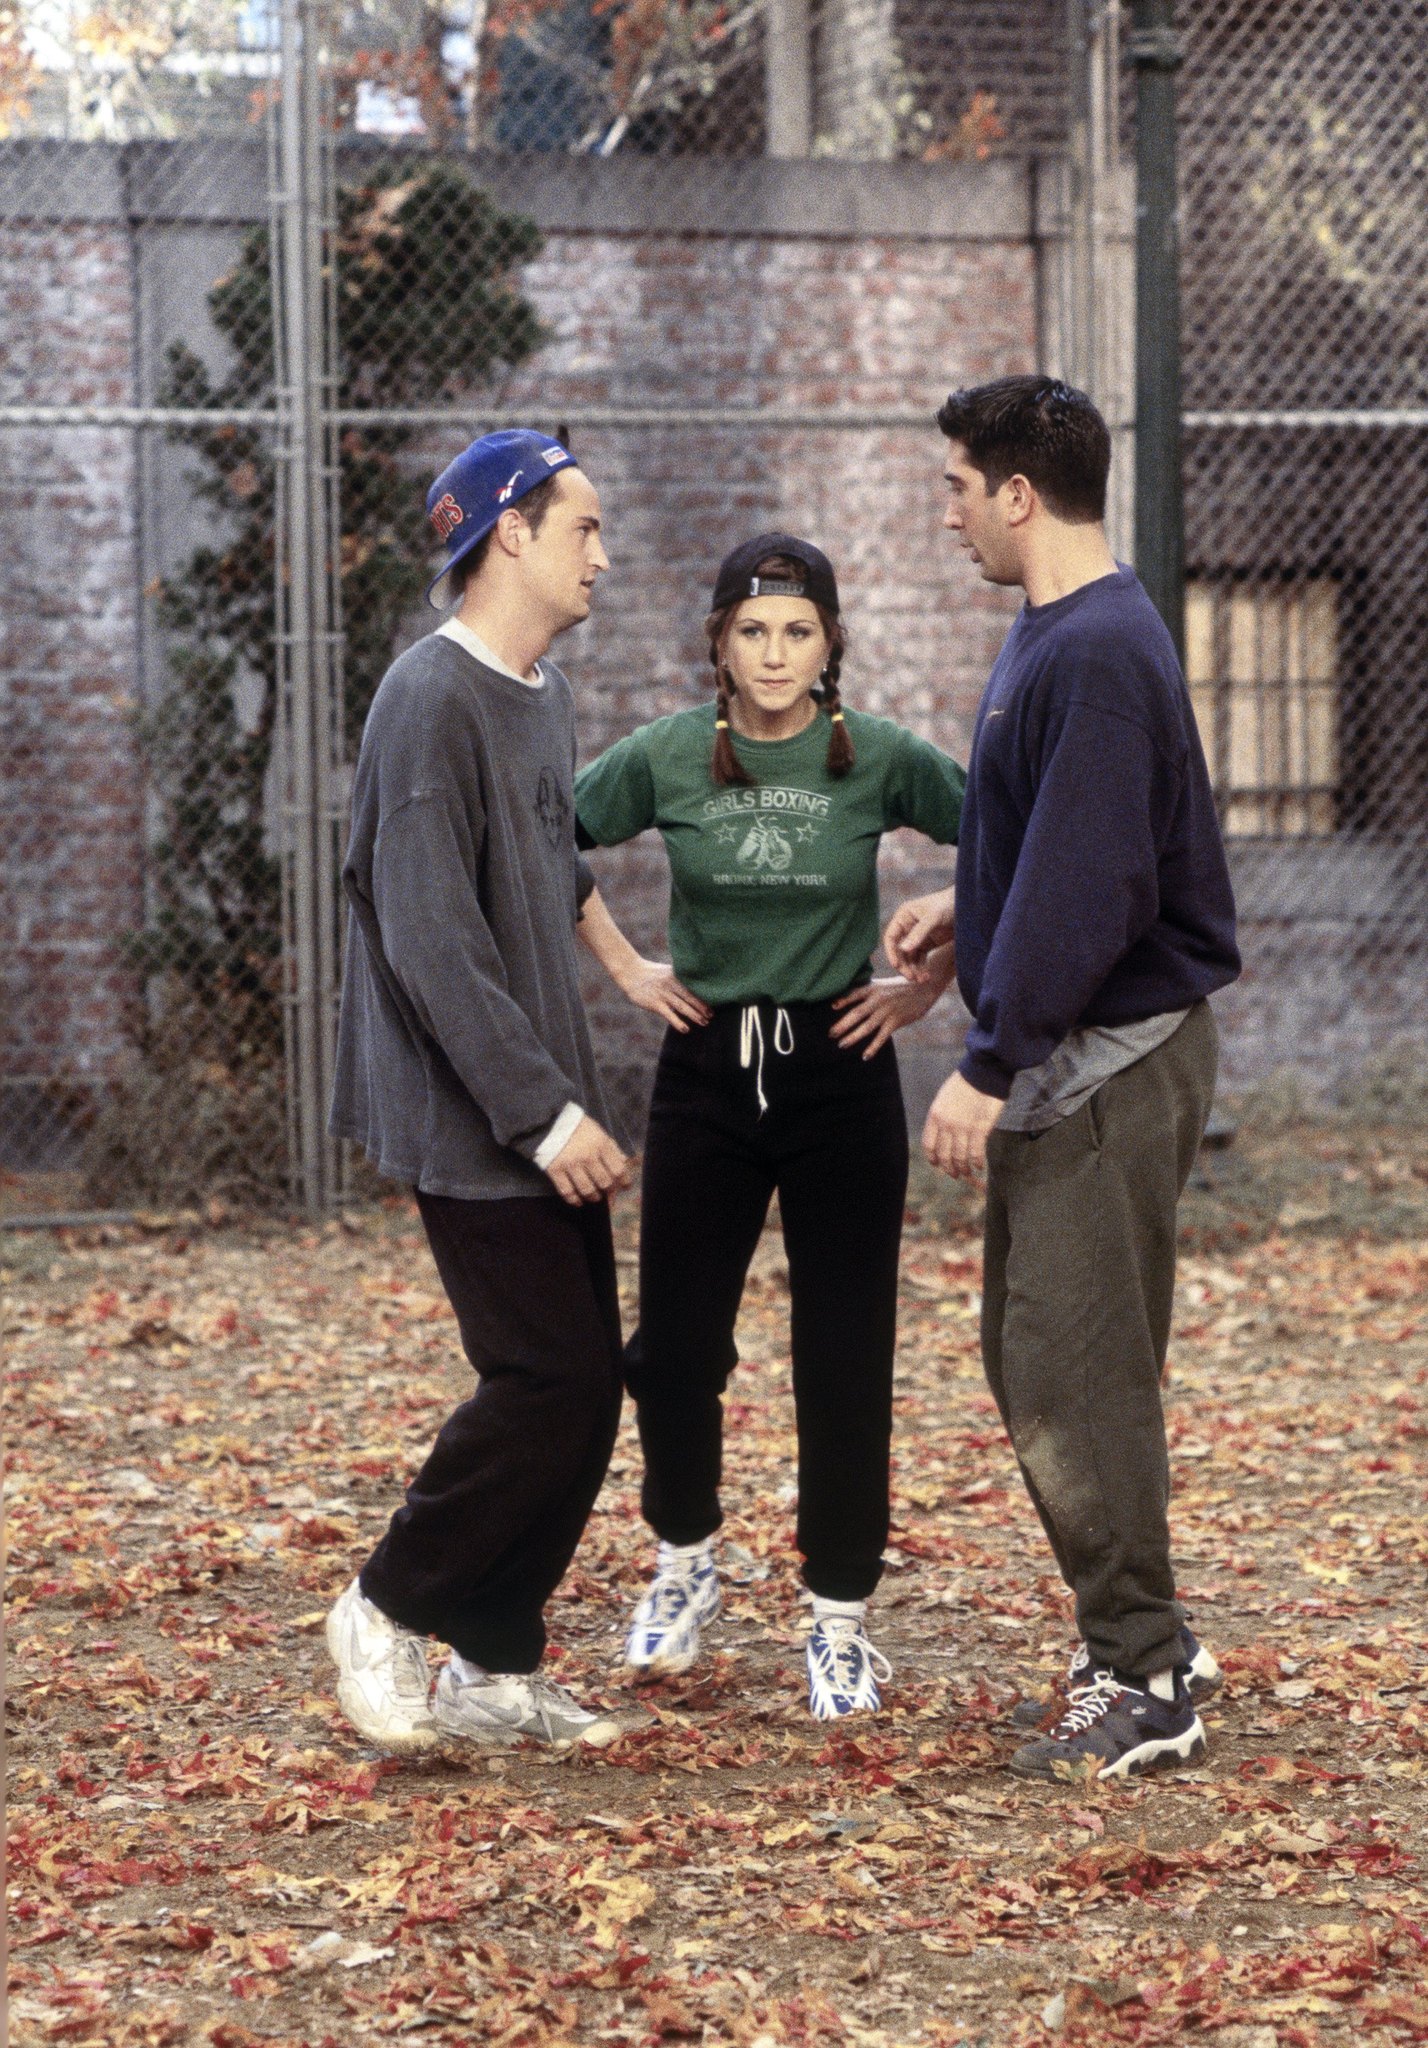 Chandler, Rachel and Ross from FRIENDS stood together in a line. Rachel has hands on her hips wearing a cap backwards with plaits in, a long sleeved black t-shirt with a green graphic t-shirt over the top, black jog pants and white trainers. Background is a leafy autumn park scene.